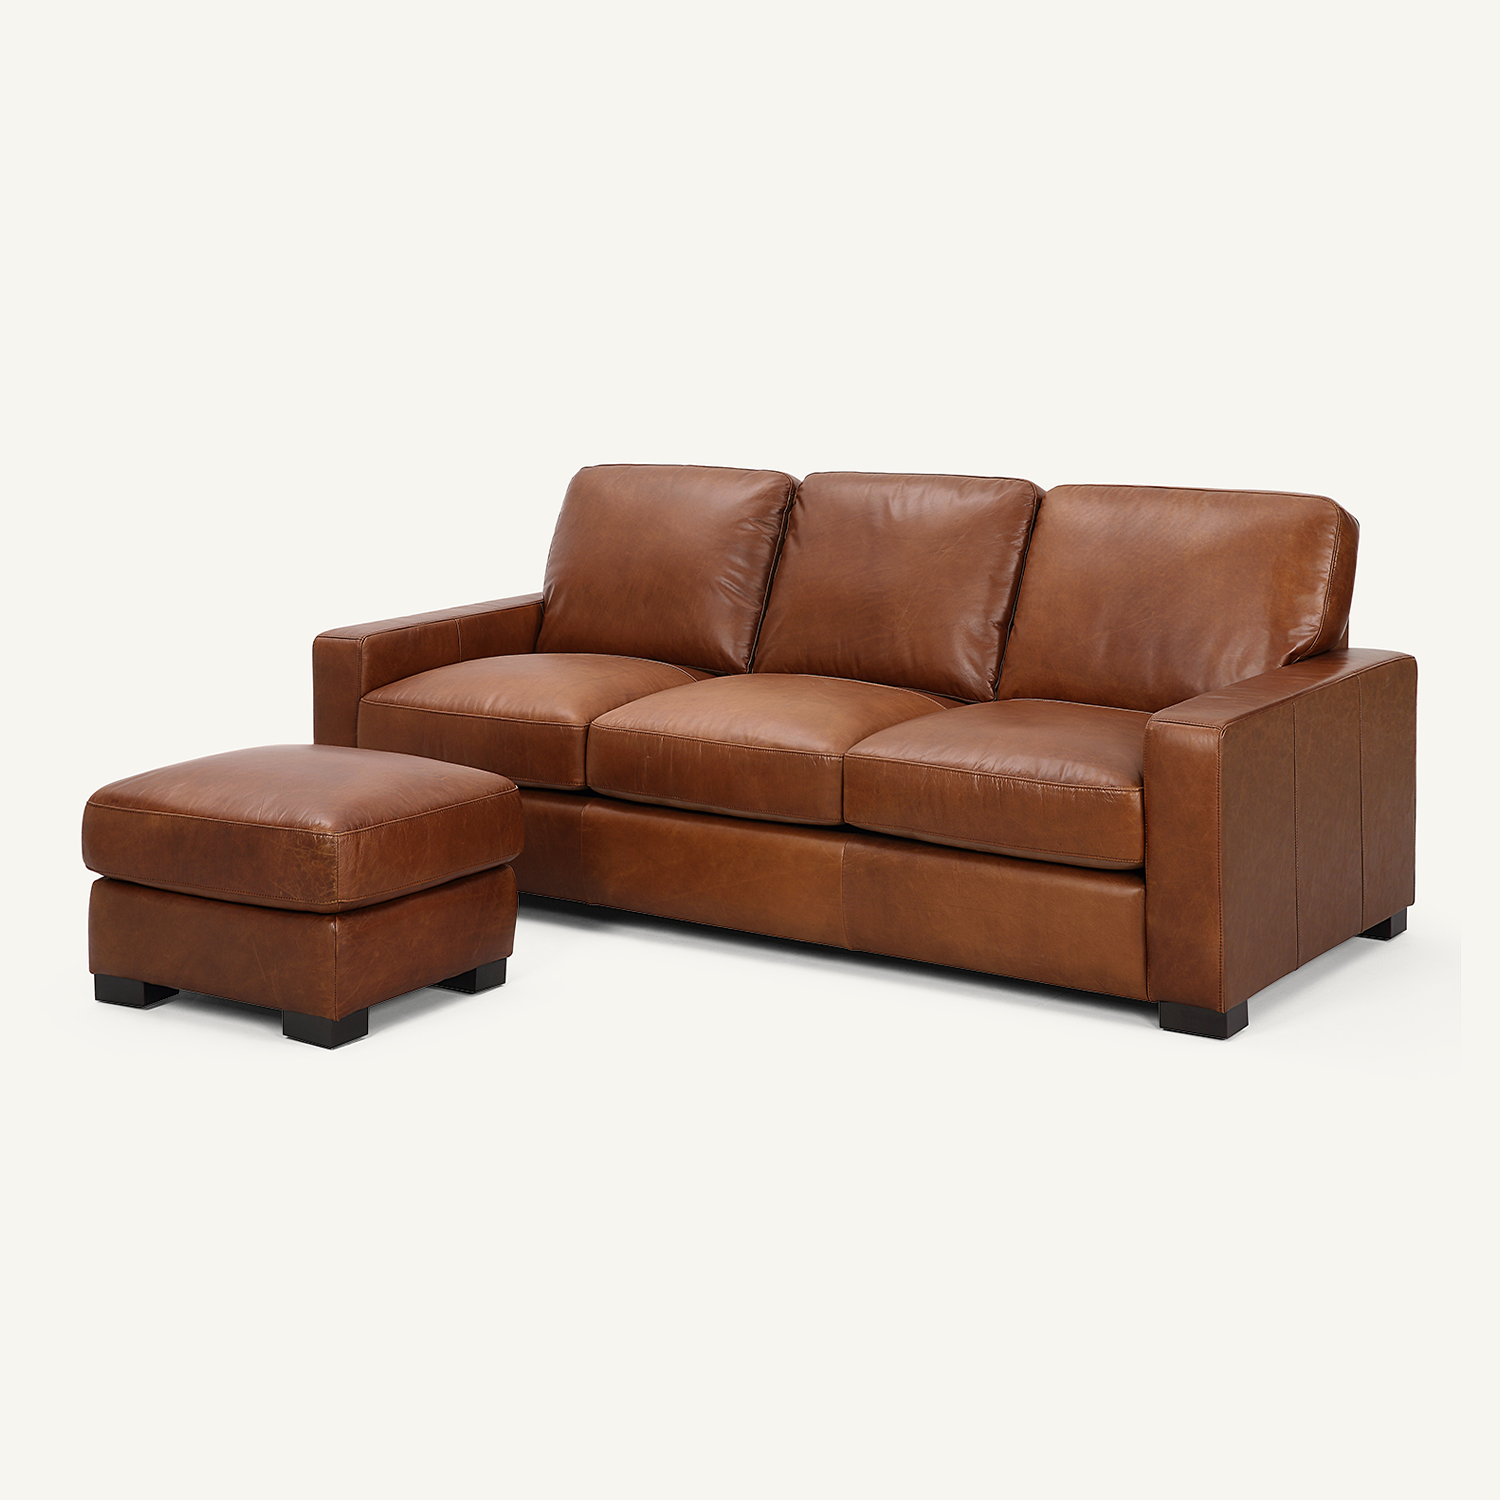 Randall Chestnut Brown Oil Wax Leather 3-Seater Sofa with Ottoman